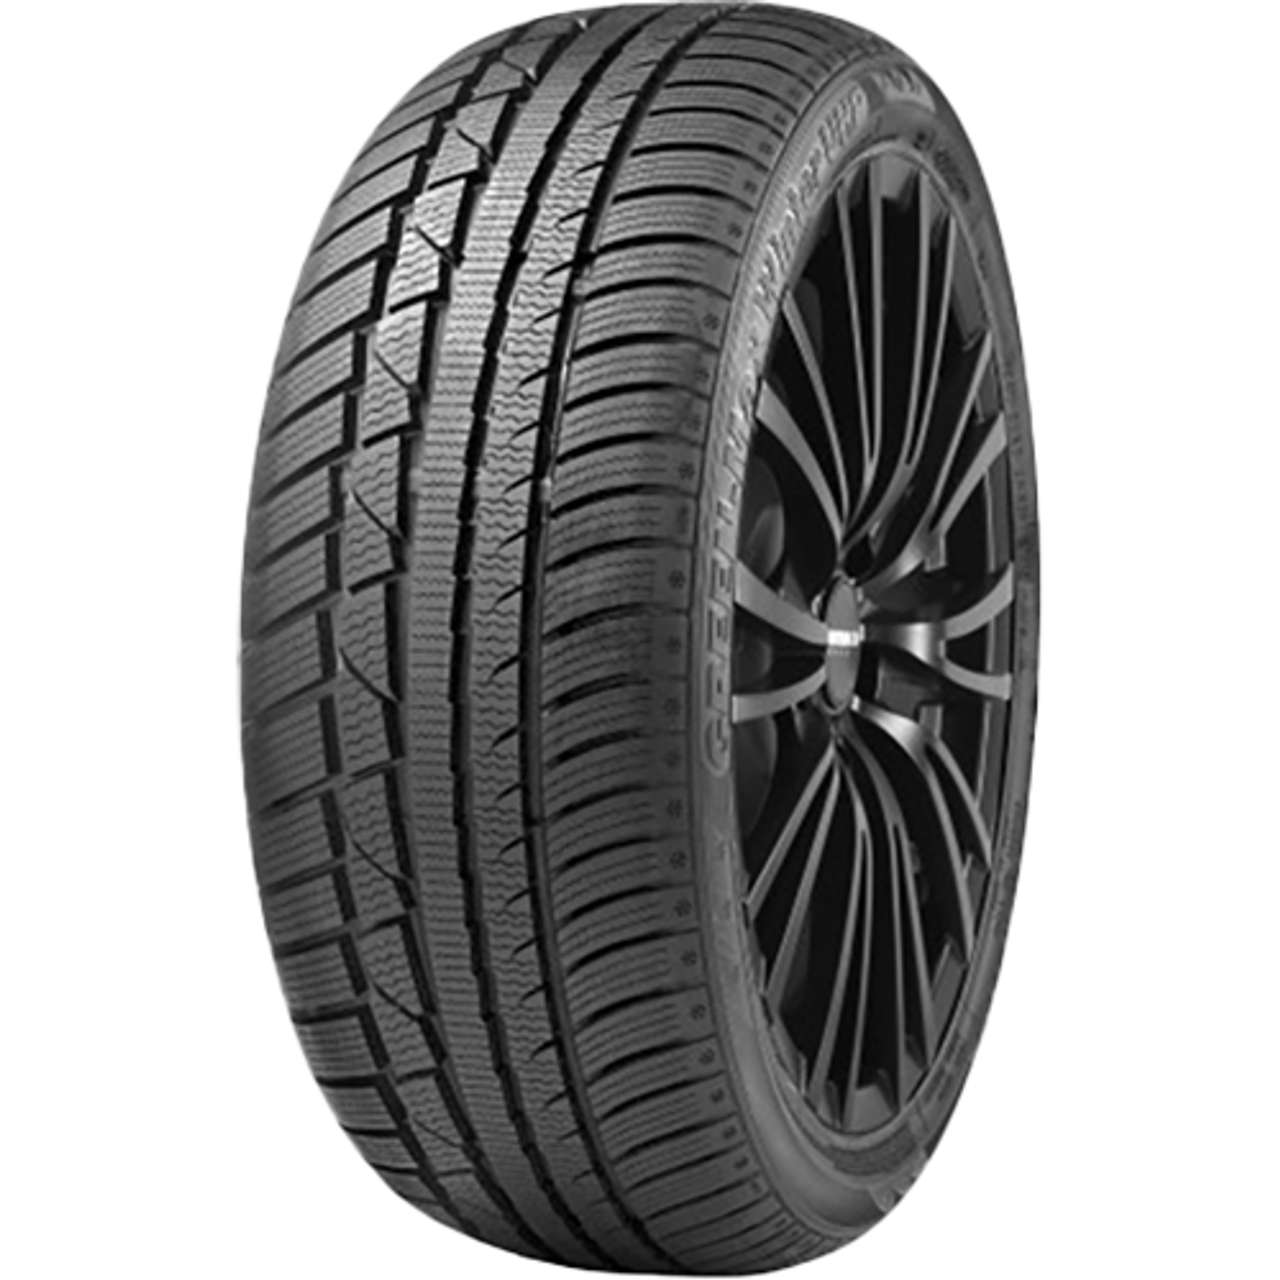 LINGLONG GREEN-MAX WINTER UHP 245/45R18 100H MFS BSW von LINGLONG